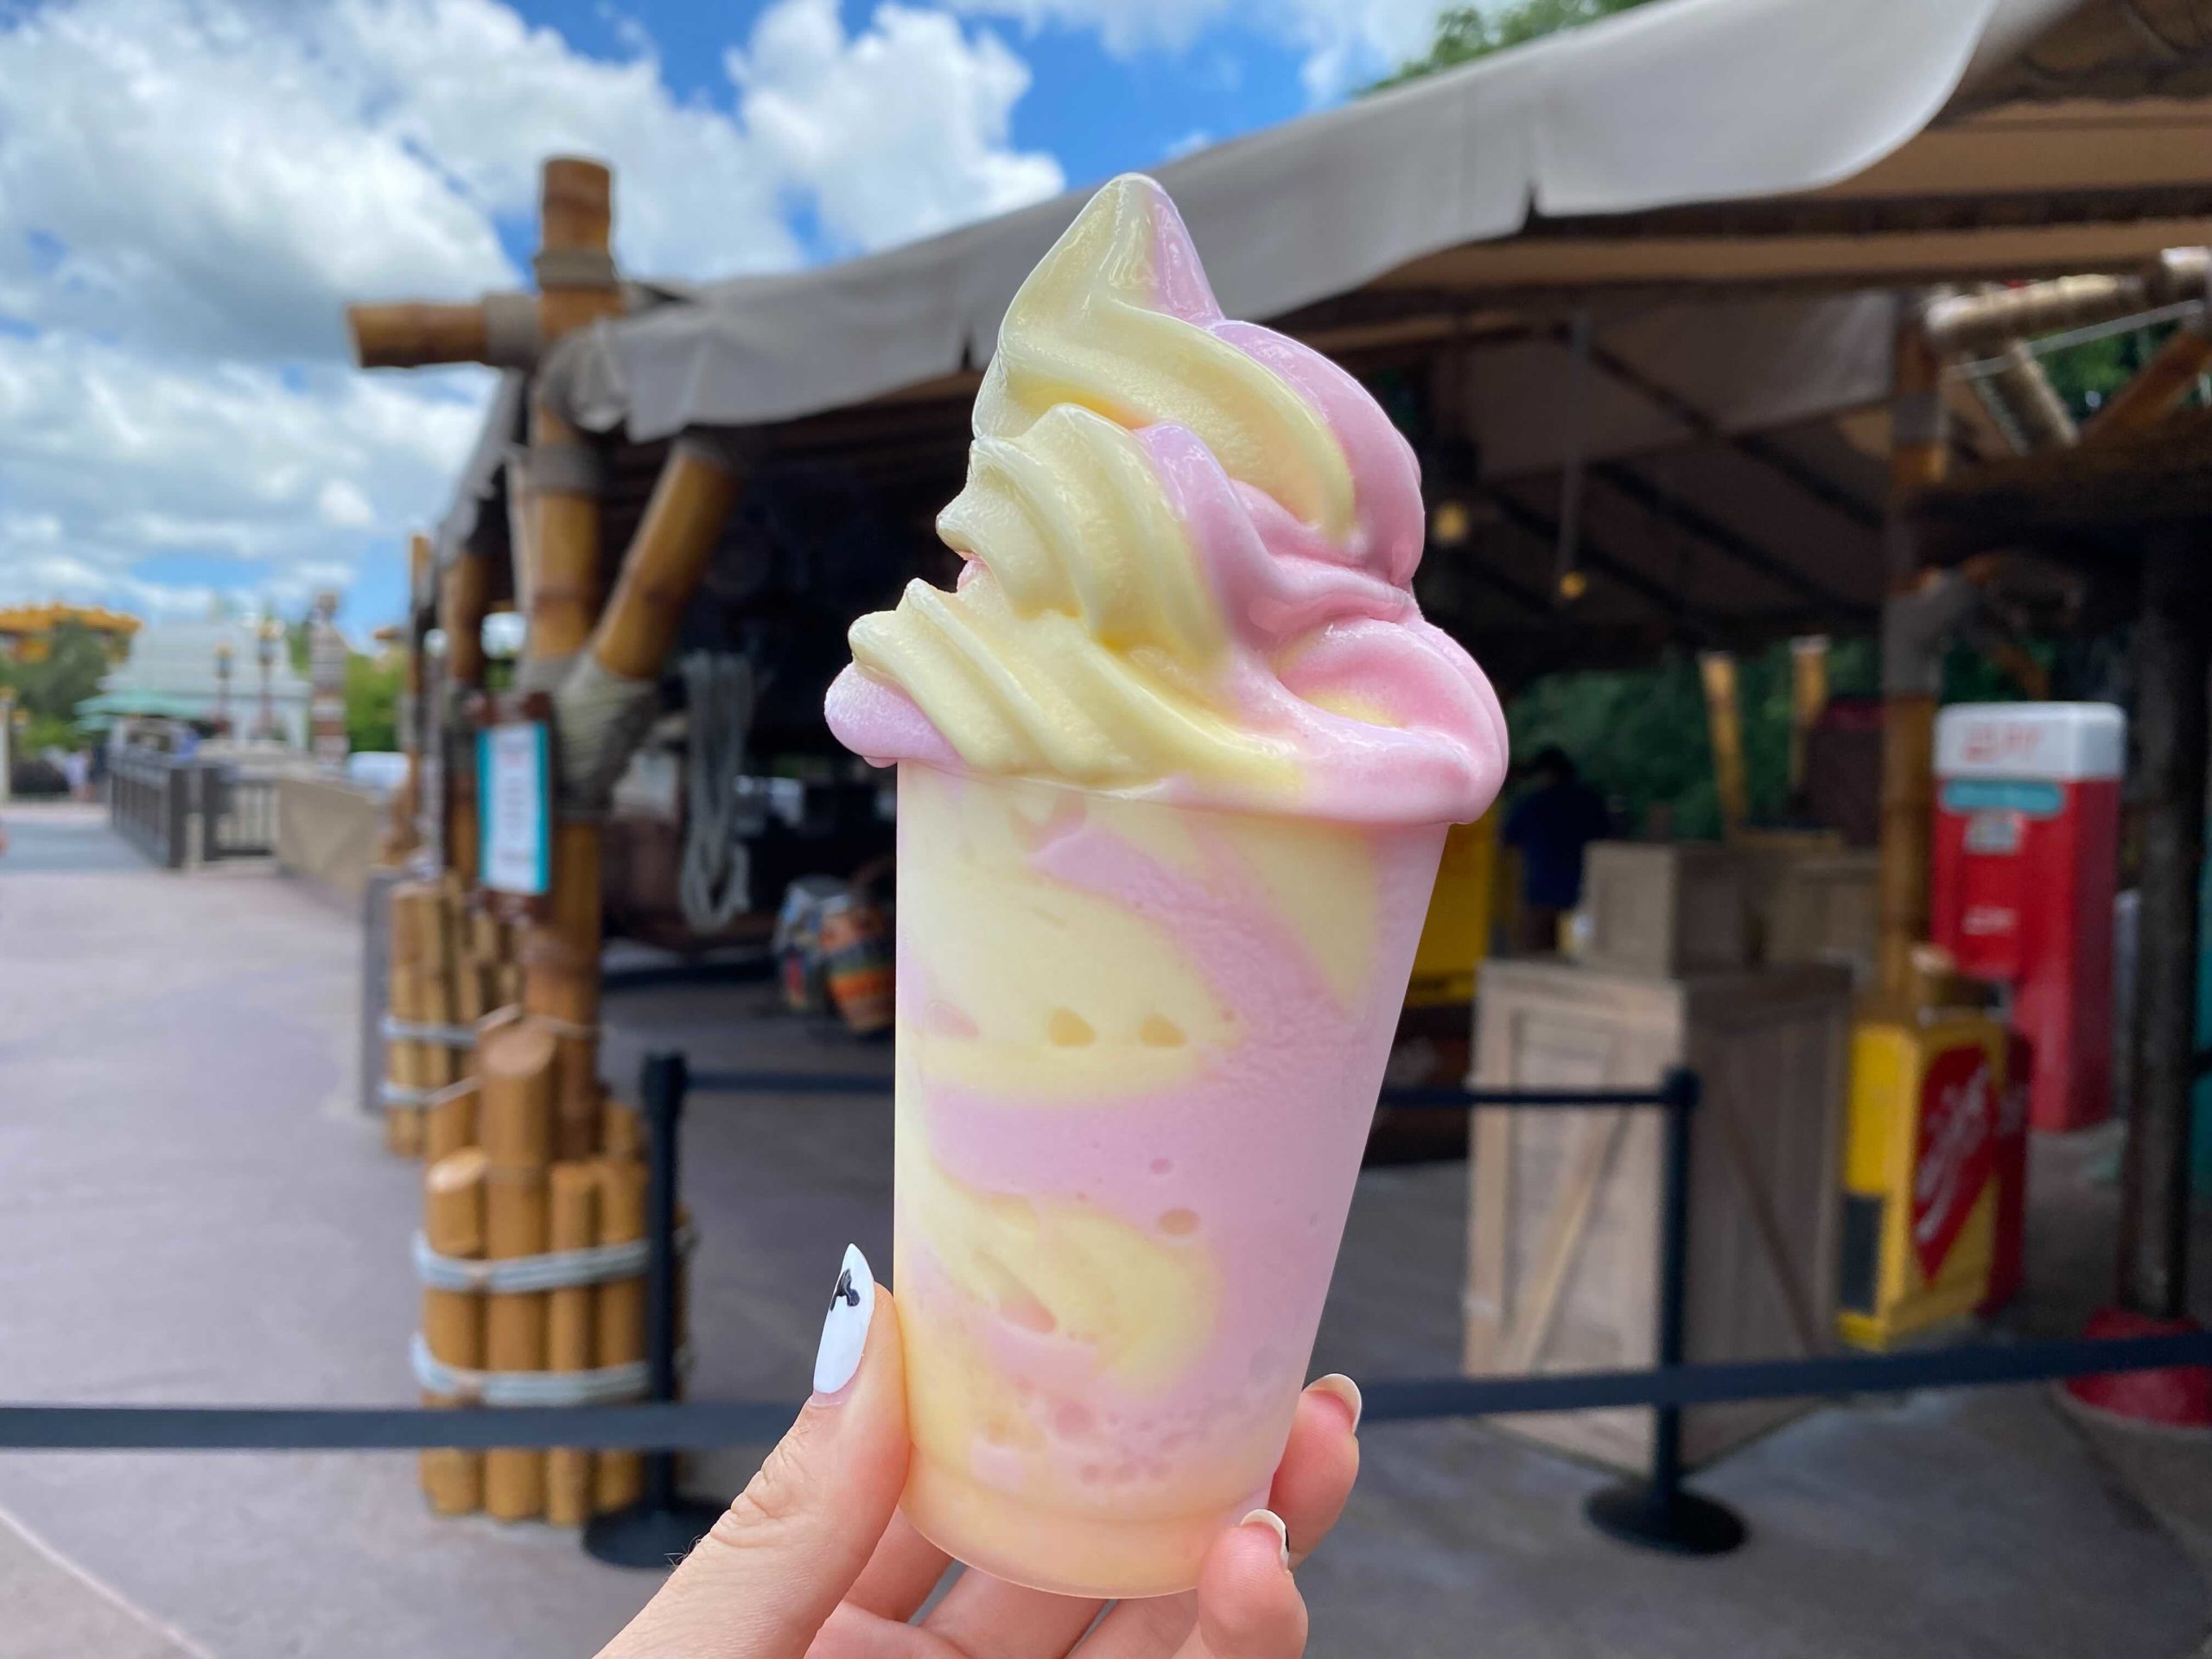 REVIEW WatermelonPineapple Swirl Dole Whip is Now Available at EPCOT